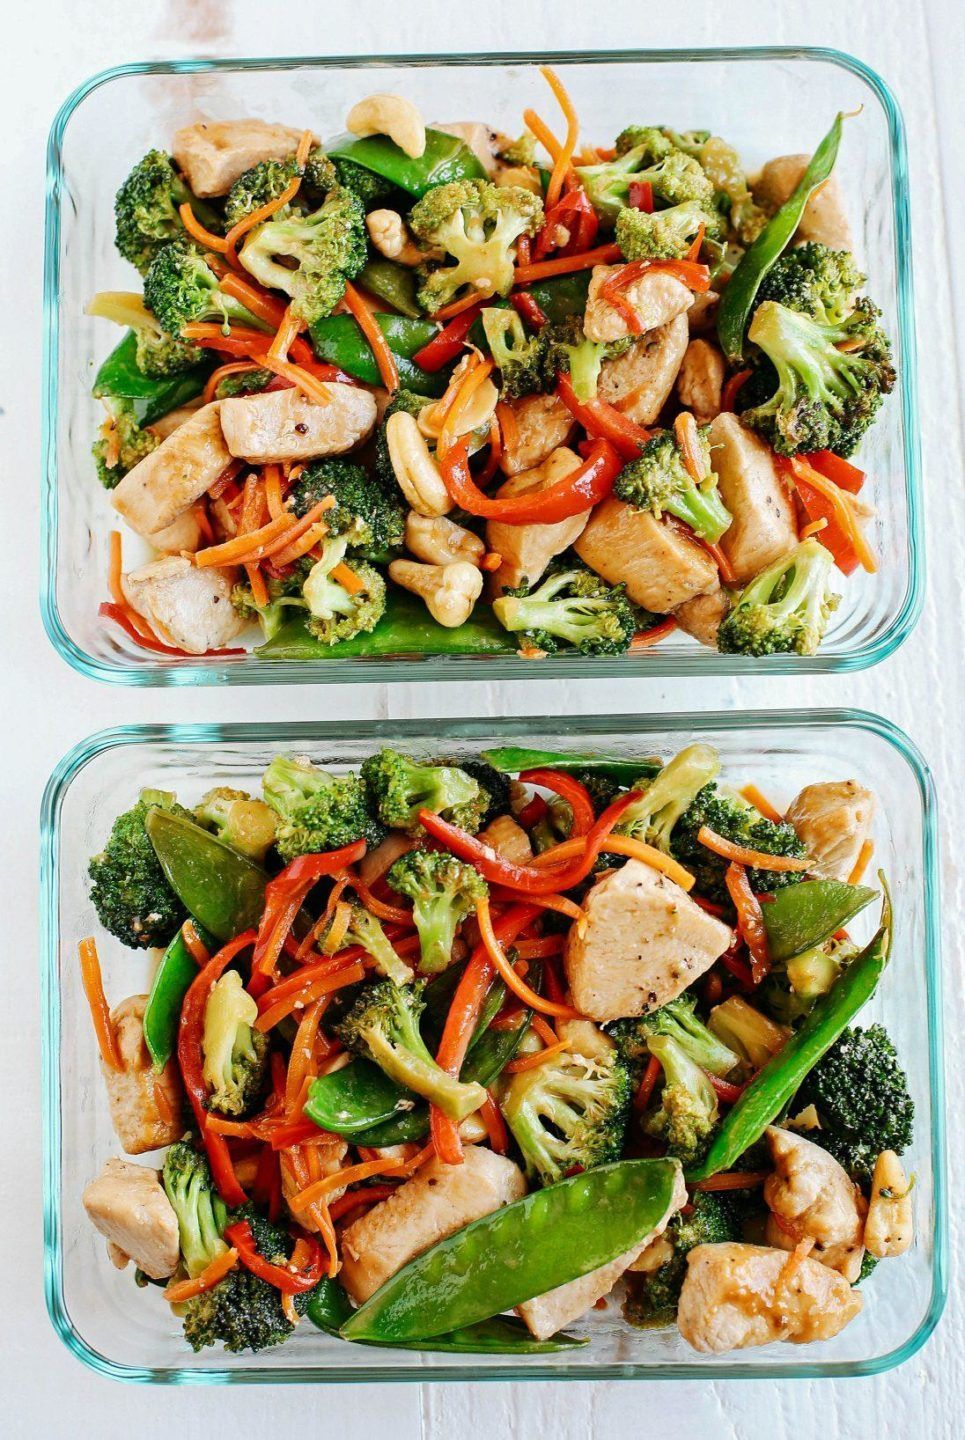 28 Healthy Meal Prep Recipes for an Easy Week -   22 fitness meals work lunches
 ideas